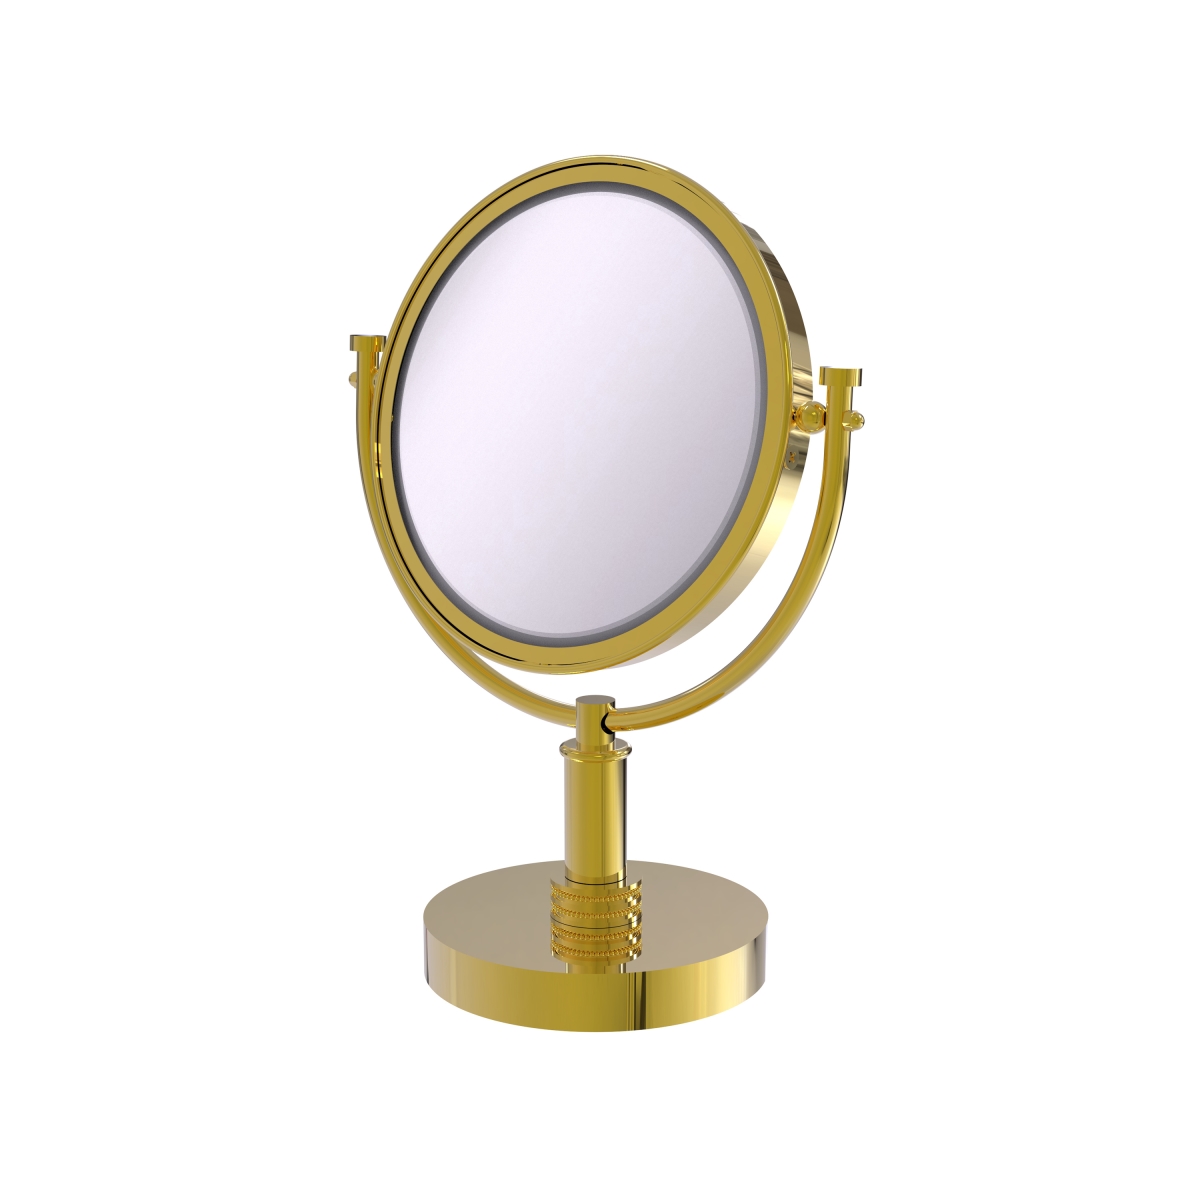 Picture of Allied Brass DM-4D-5X-PB 8 in. Vanity Top Make-Up Mirror 5X Magnification, Polished Brass - 15 x 8 x 8 in.